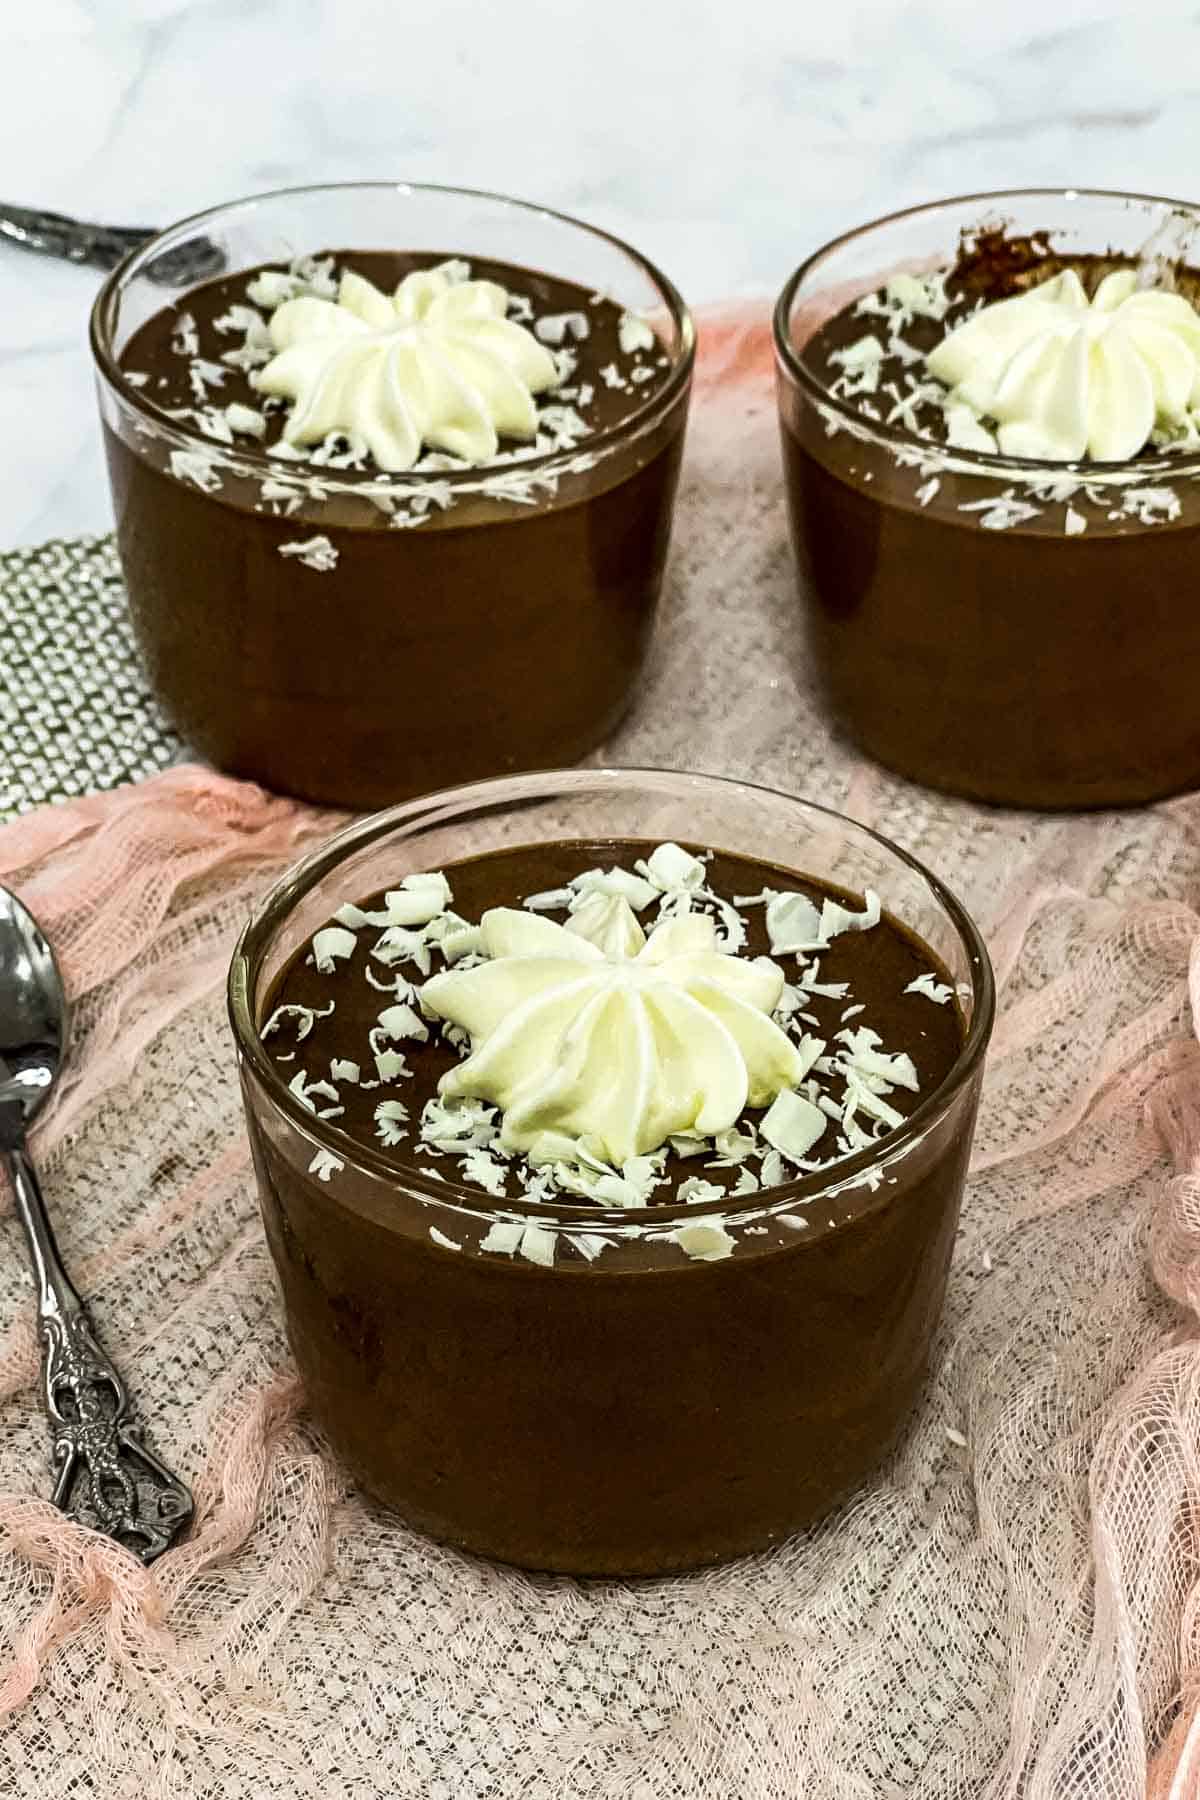 3 cups of mascarpone chocolate mousse with white chocolate topping.